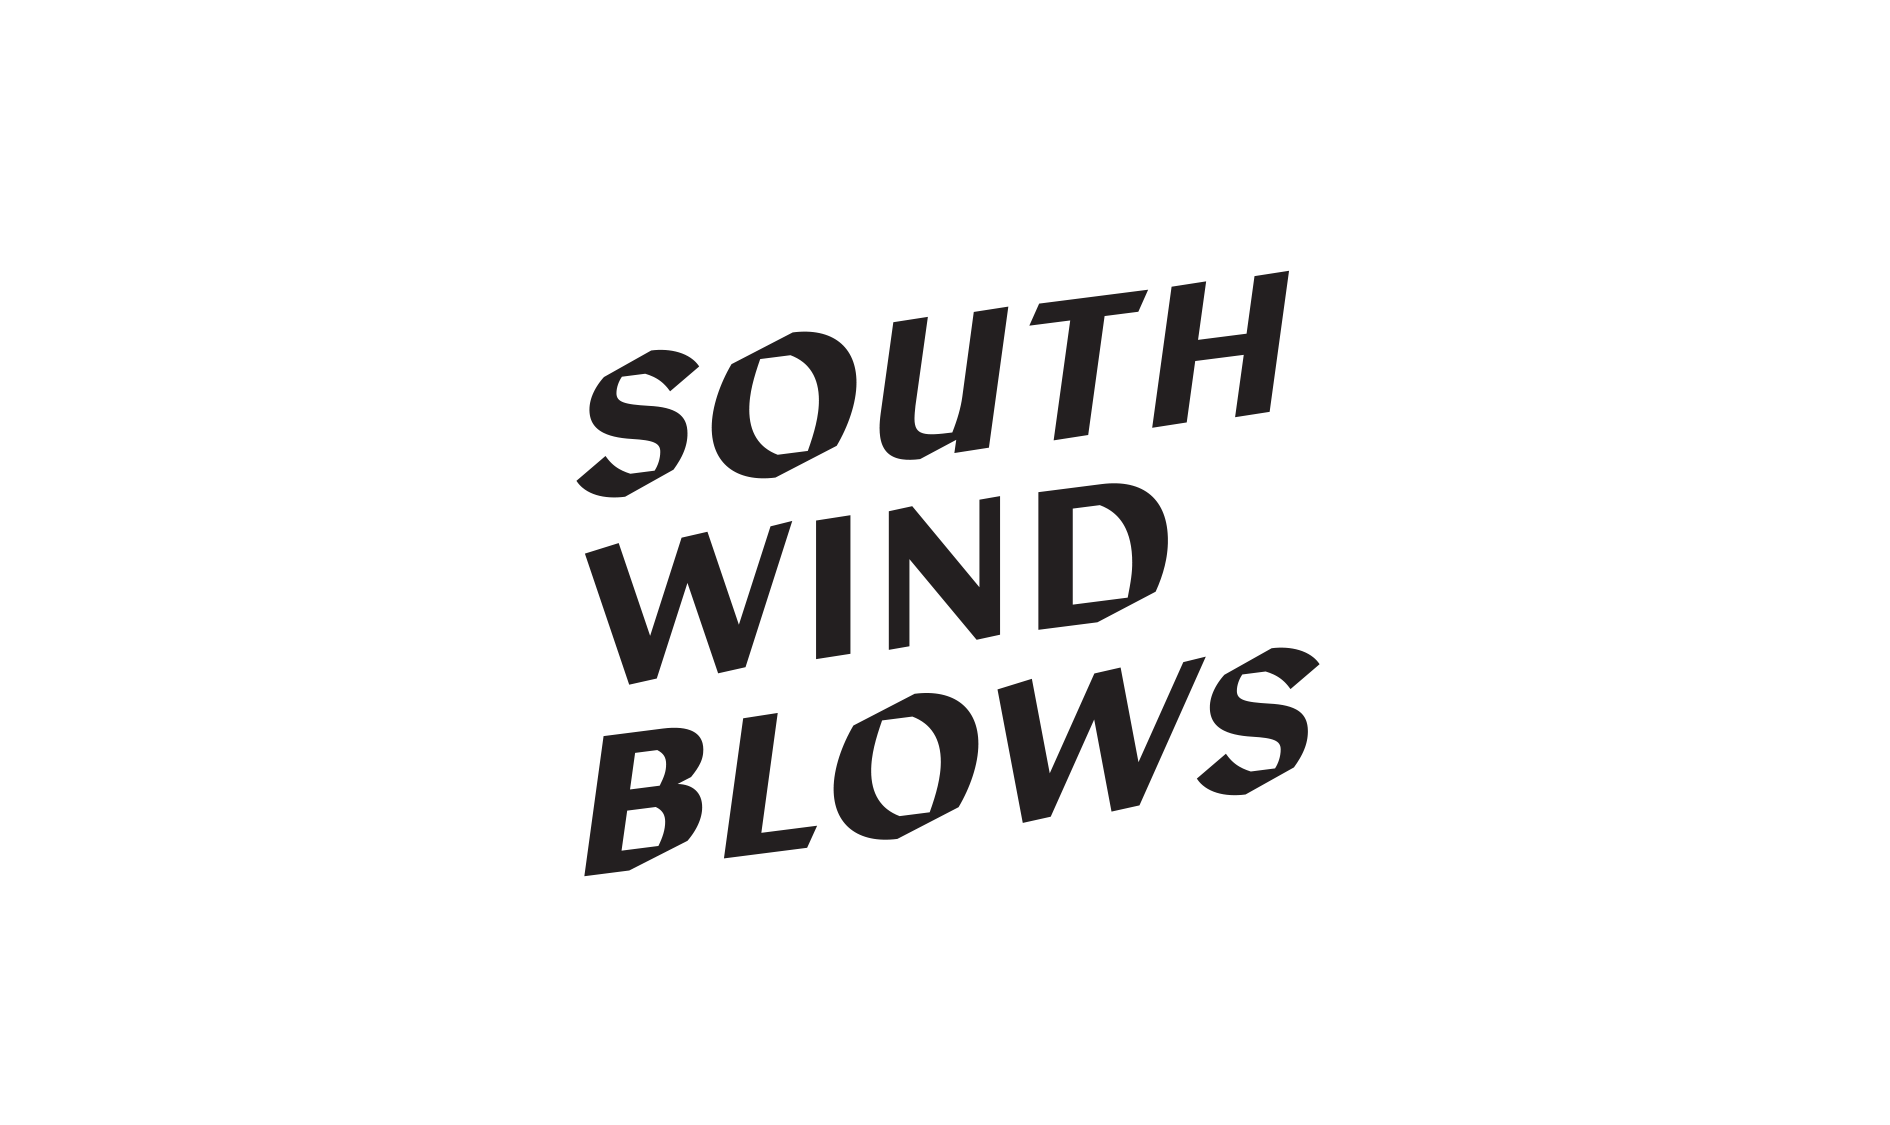 SOUTH WIND BLOWS